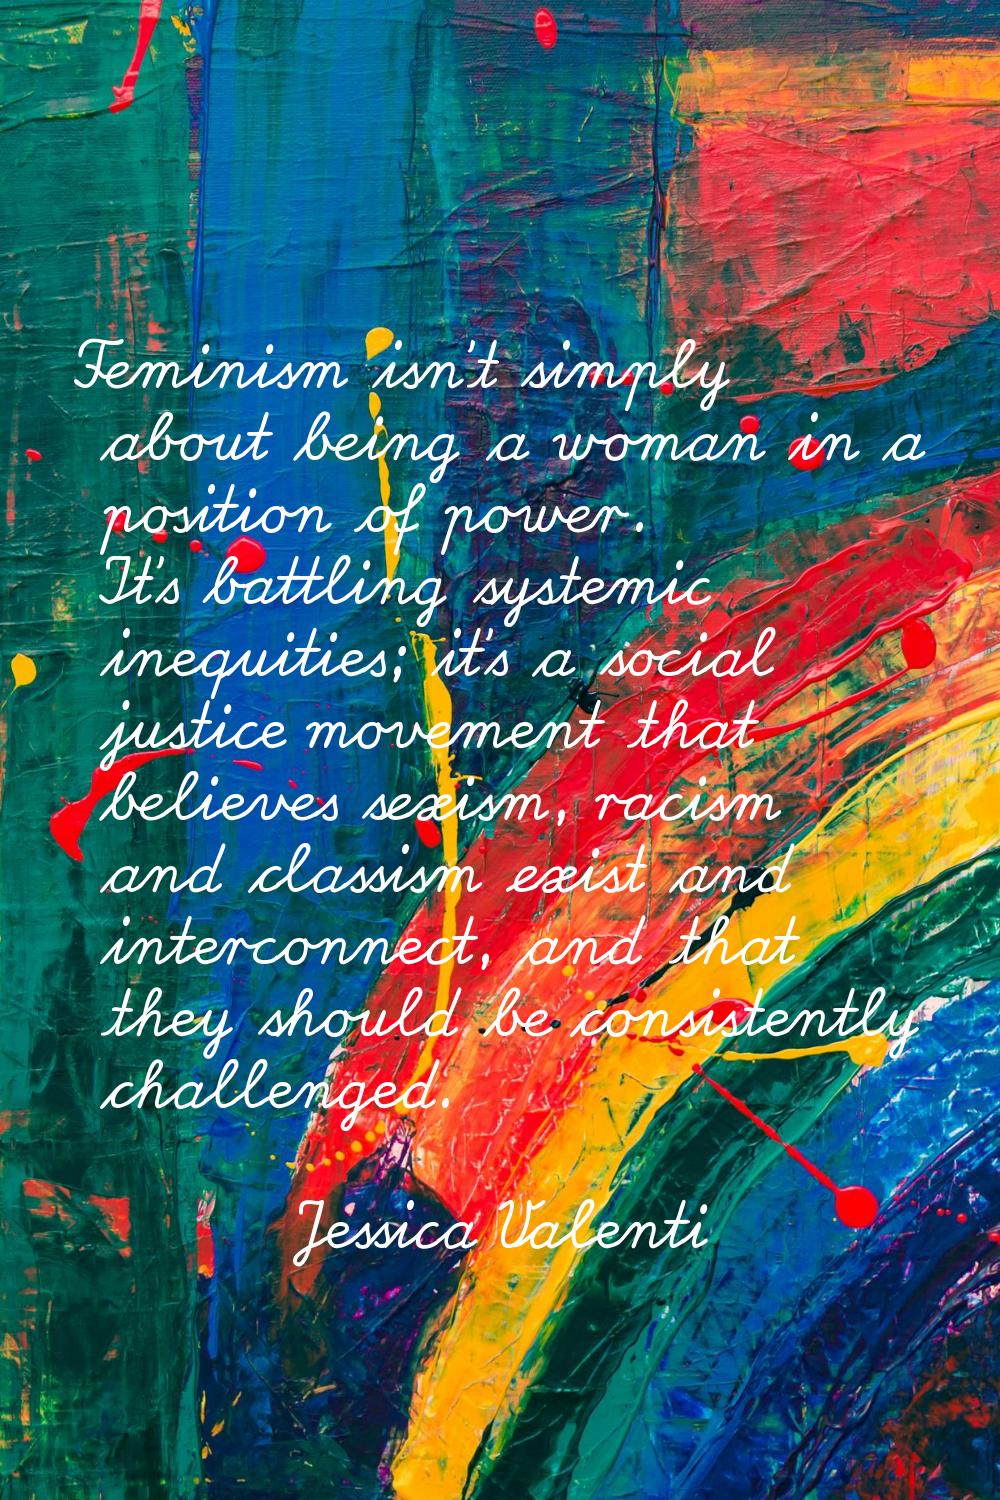 Feminism isn't simply about being a woman in a position of power. It's battling systemic inequities